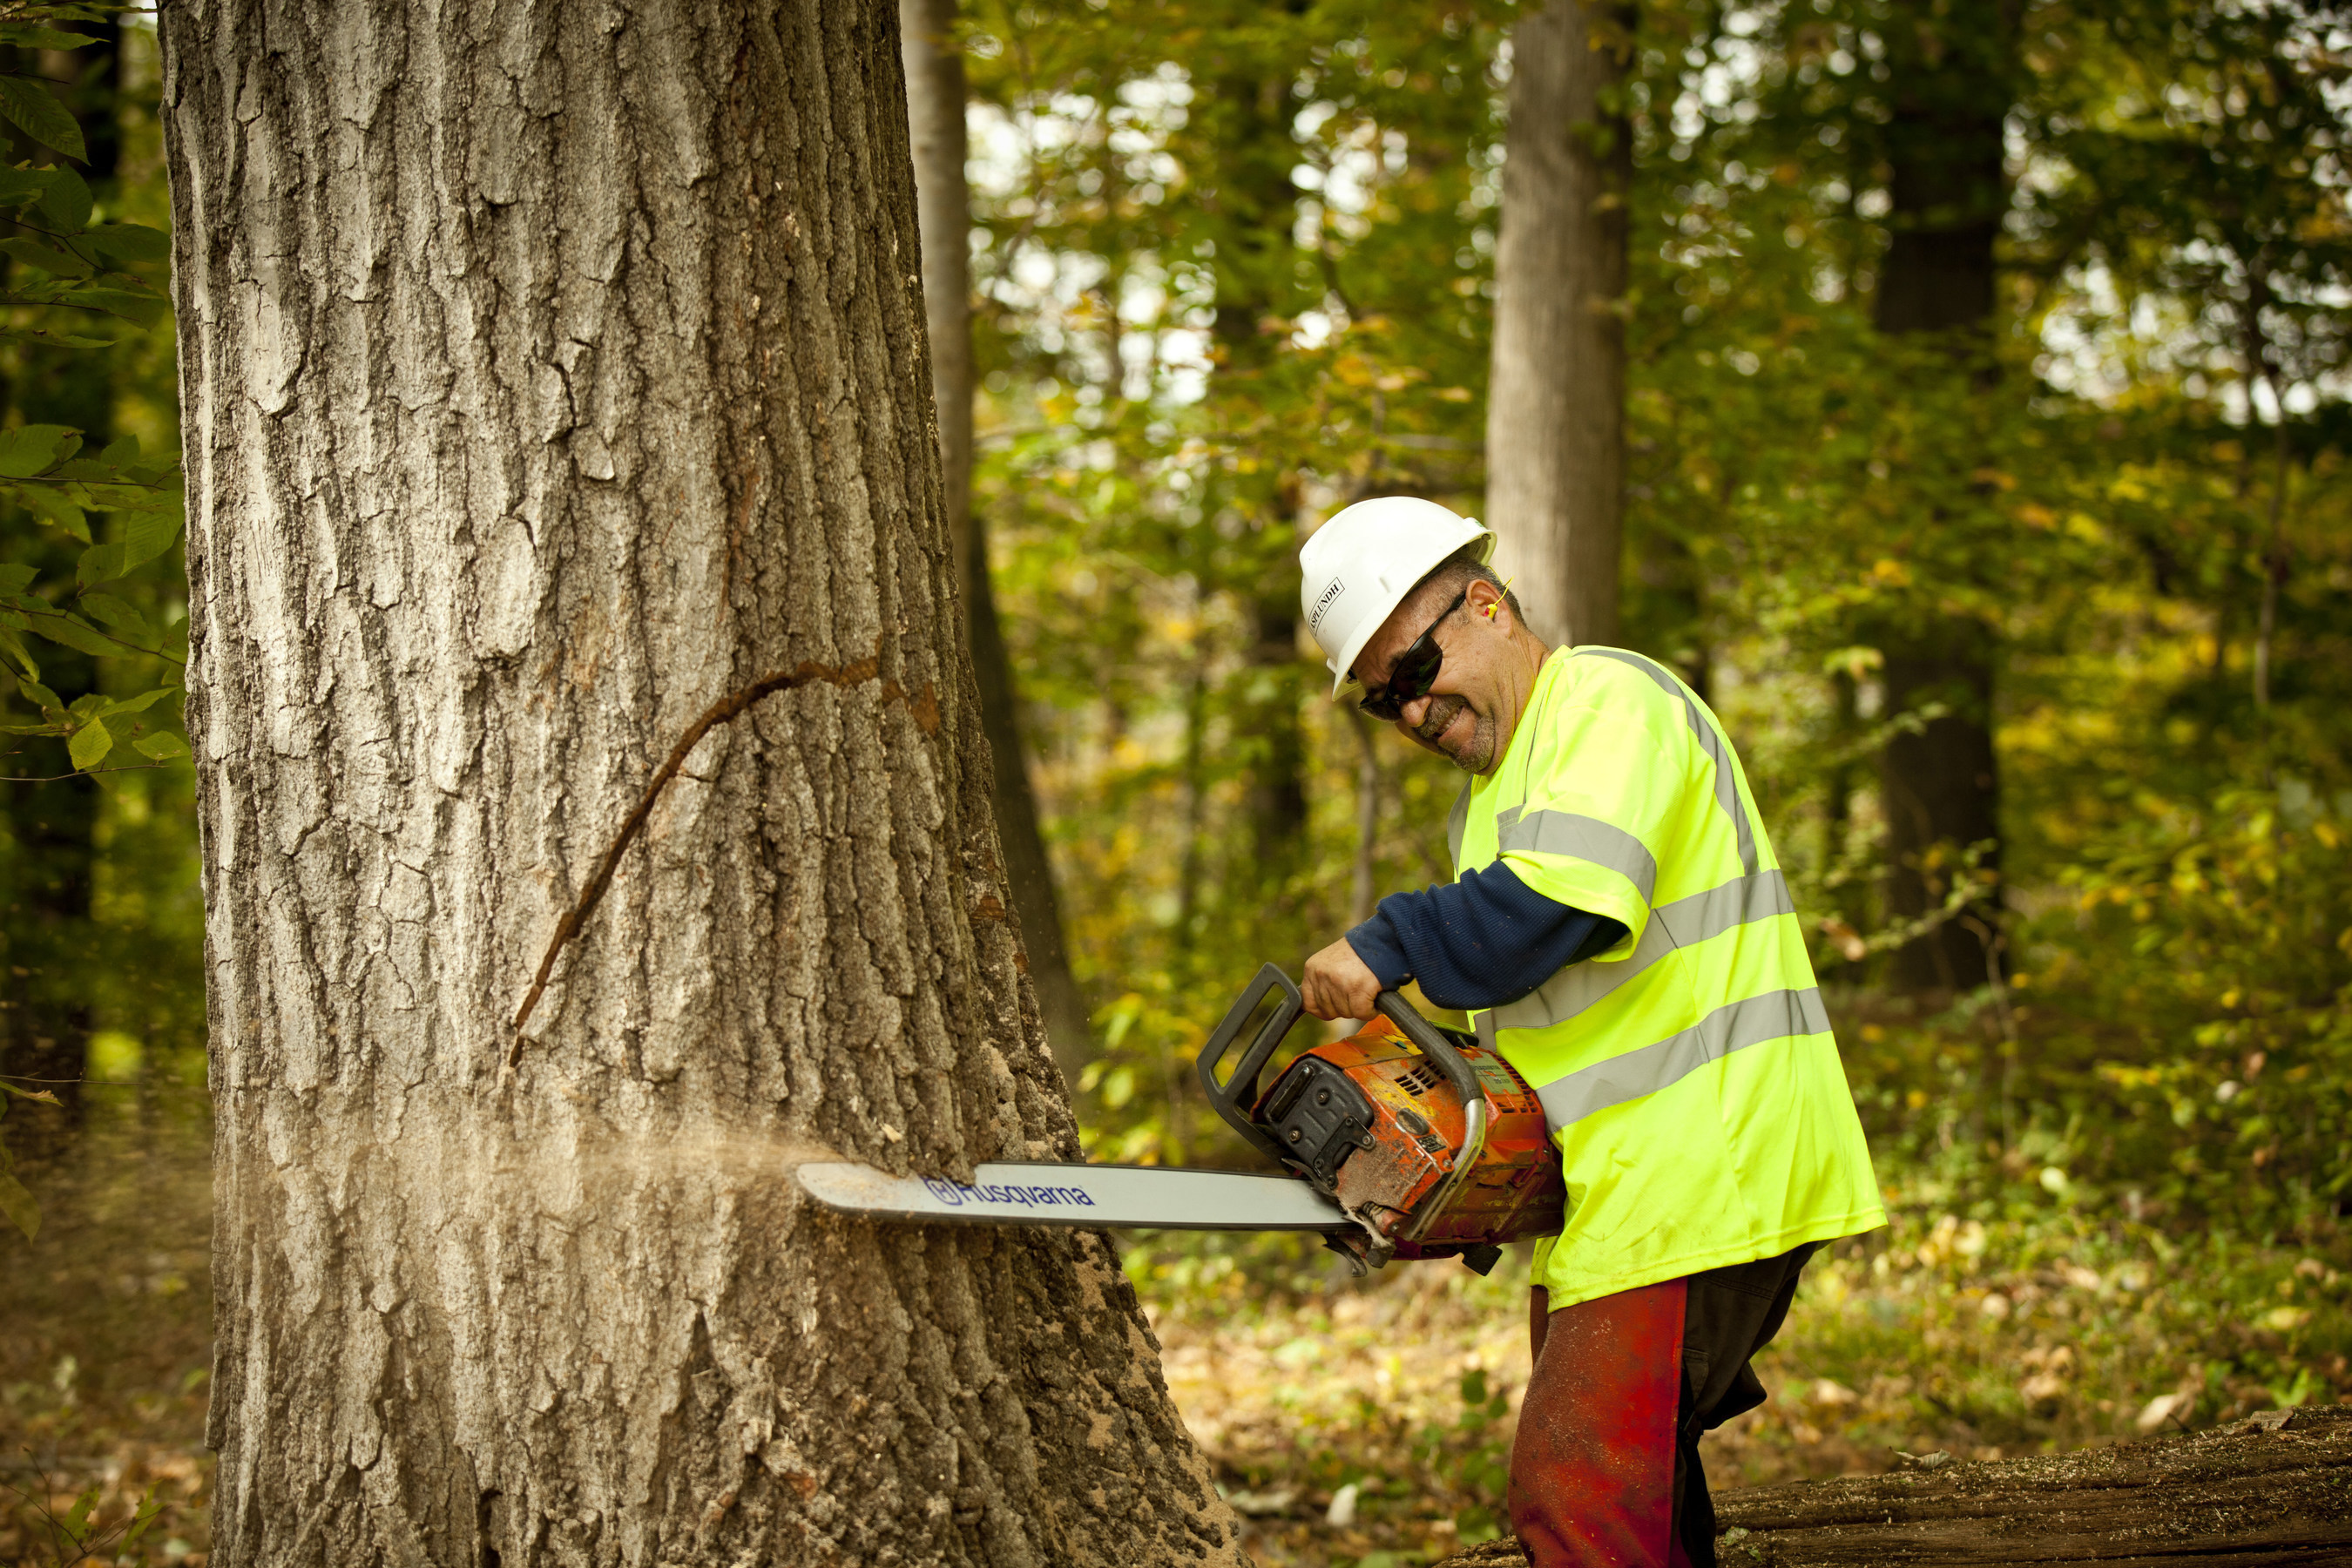 Husqvarna has been named the exclusive chainsaw provider for Asplundh. During this three-year deal, Husqvarna will be the sole provider of  professional chainsaws and accessories for the tree service leader's operations in the U.S., Canada, New Zealand and Australia.